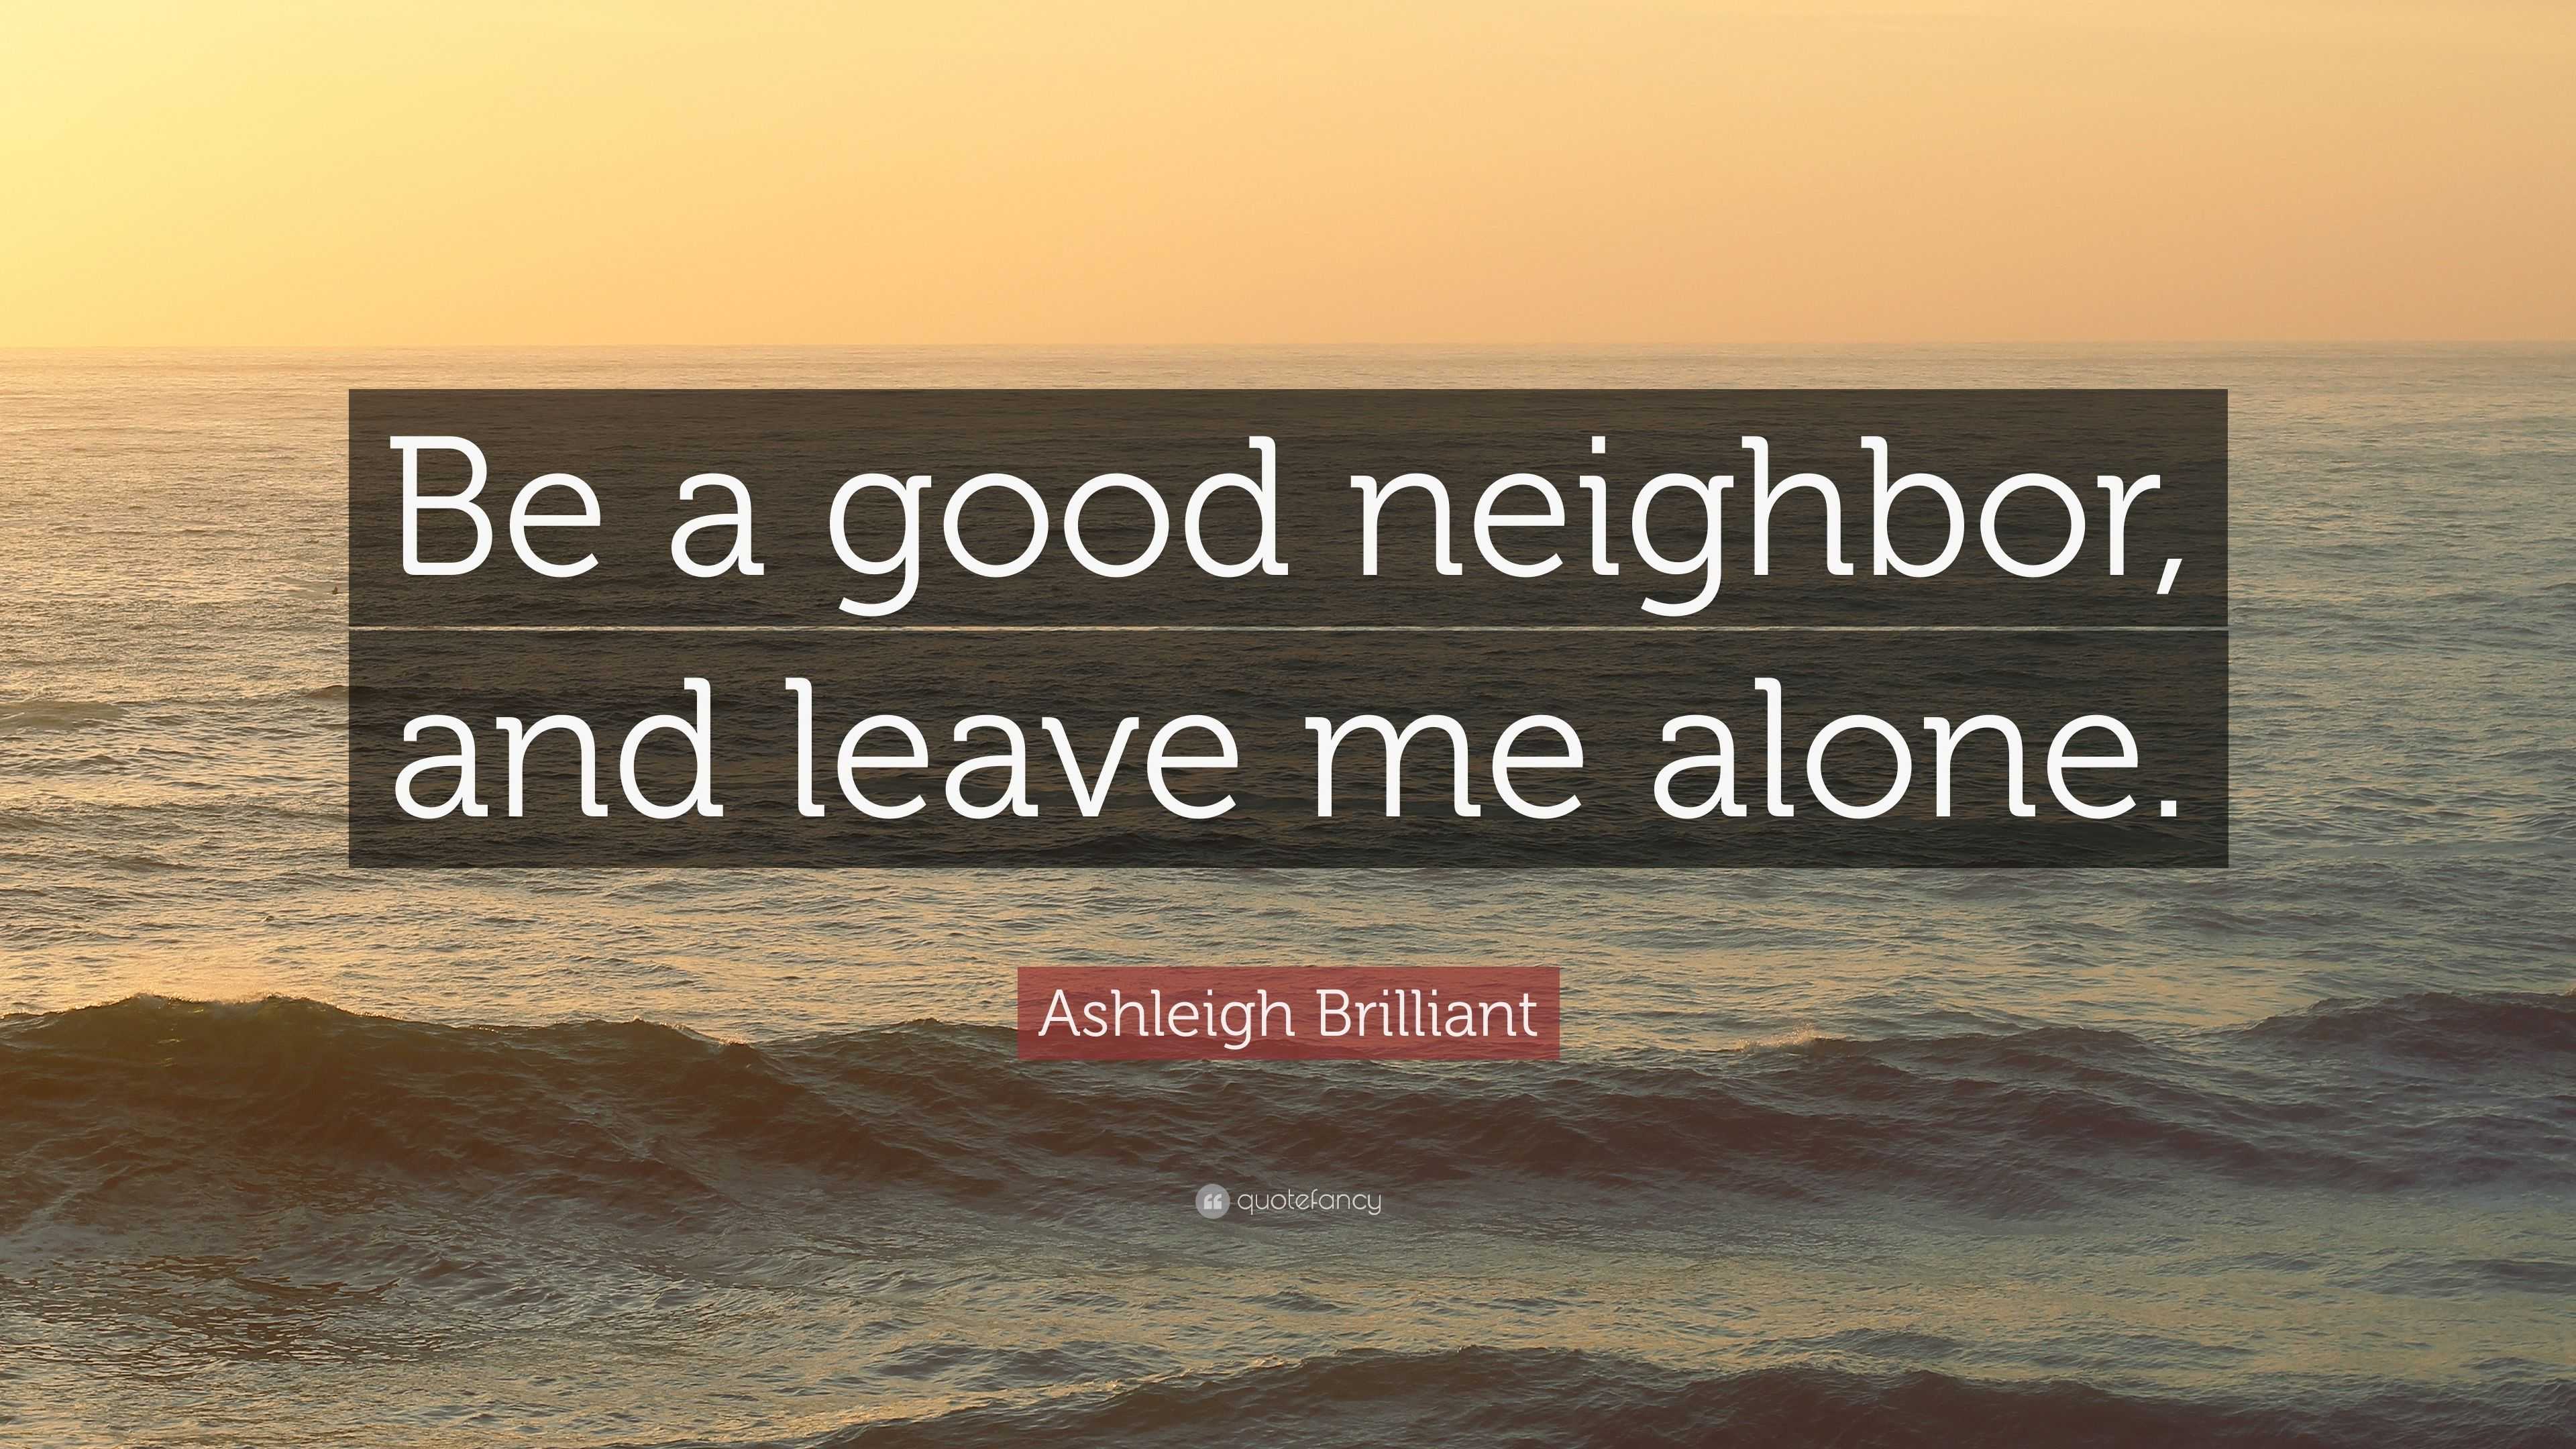 Ashleigh Brilliant Quote: "Be a good neighbor, and leave me alone." (6 wallpapers) - Quotefancy